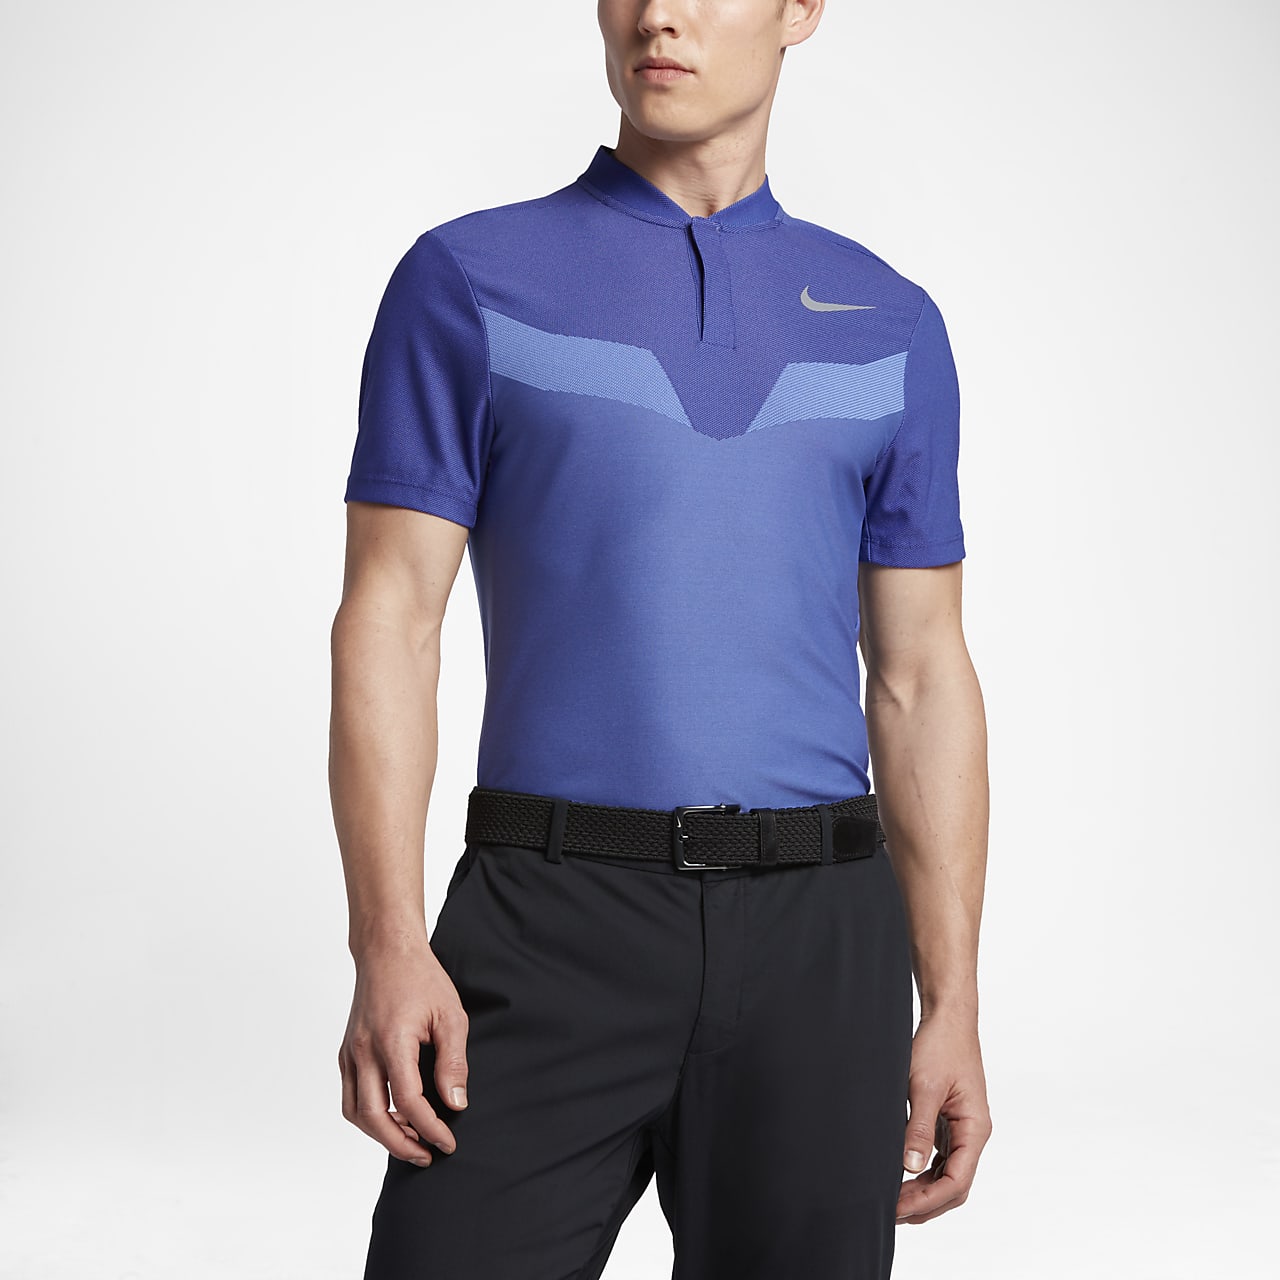 Nike Zonal Cooling Men's Slim Fit Golf Polo